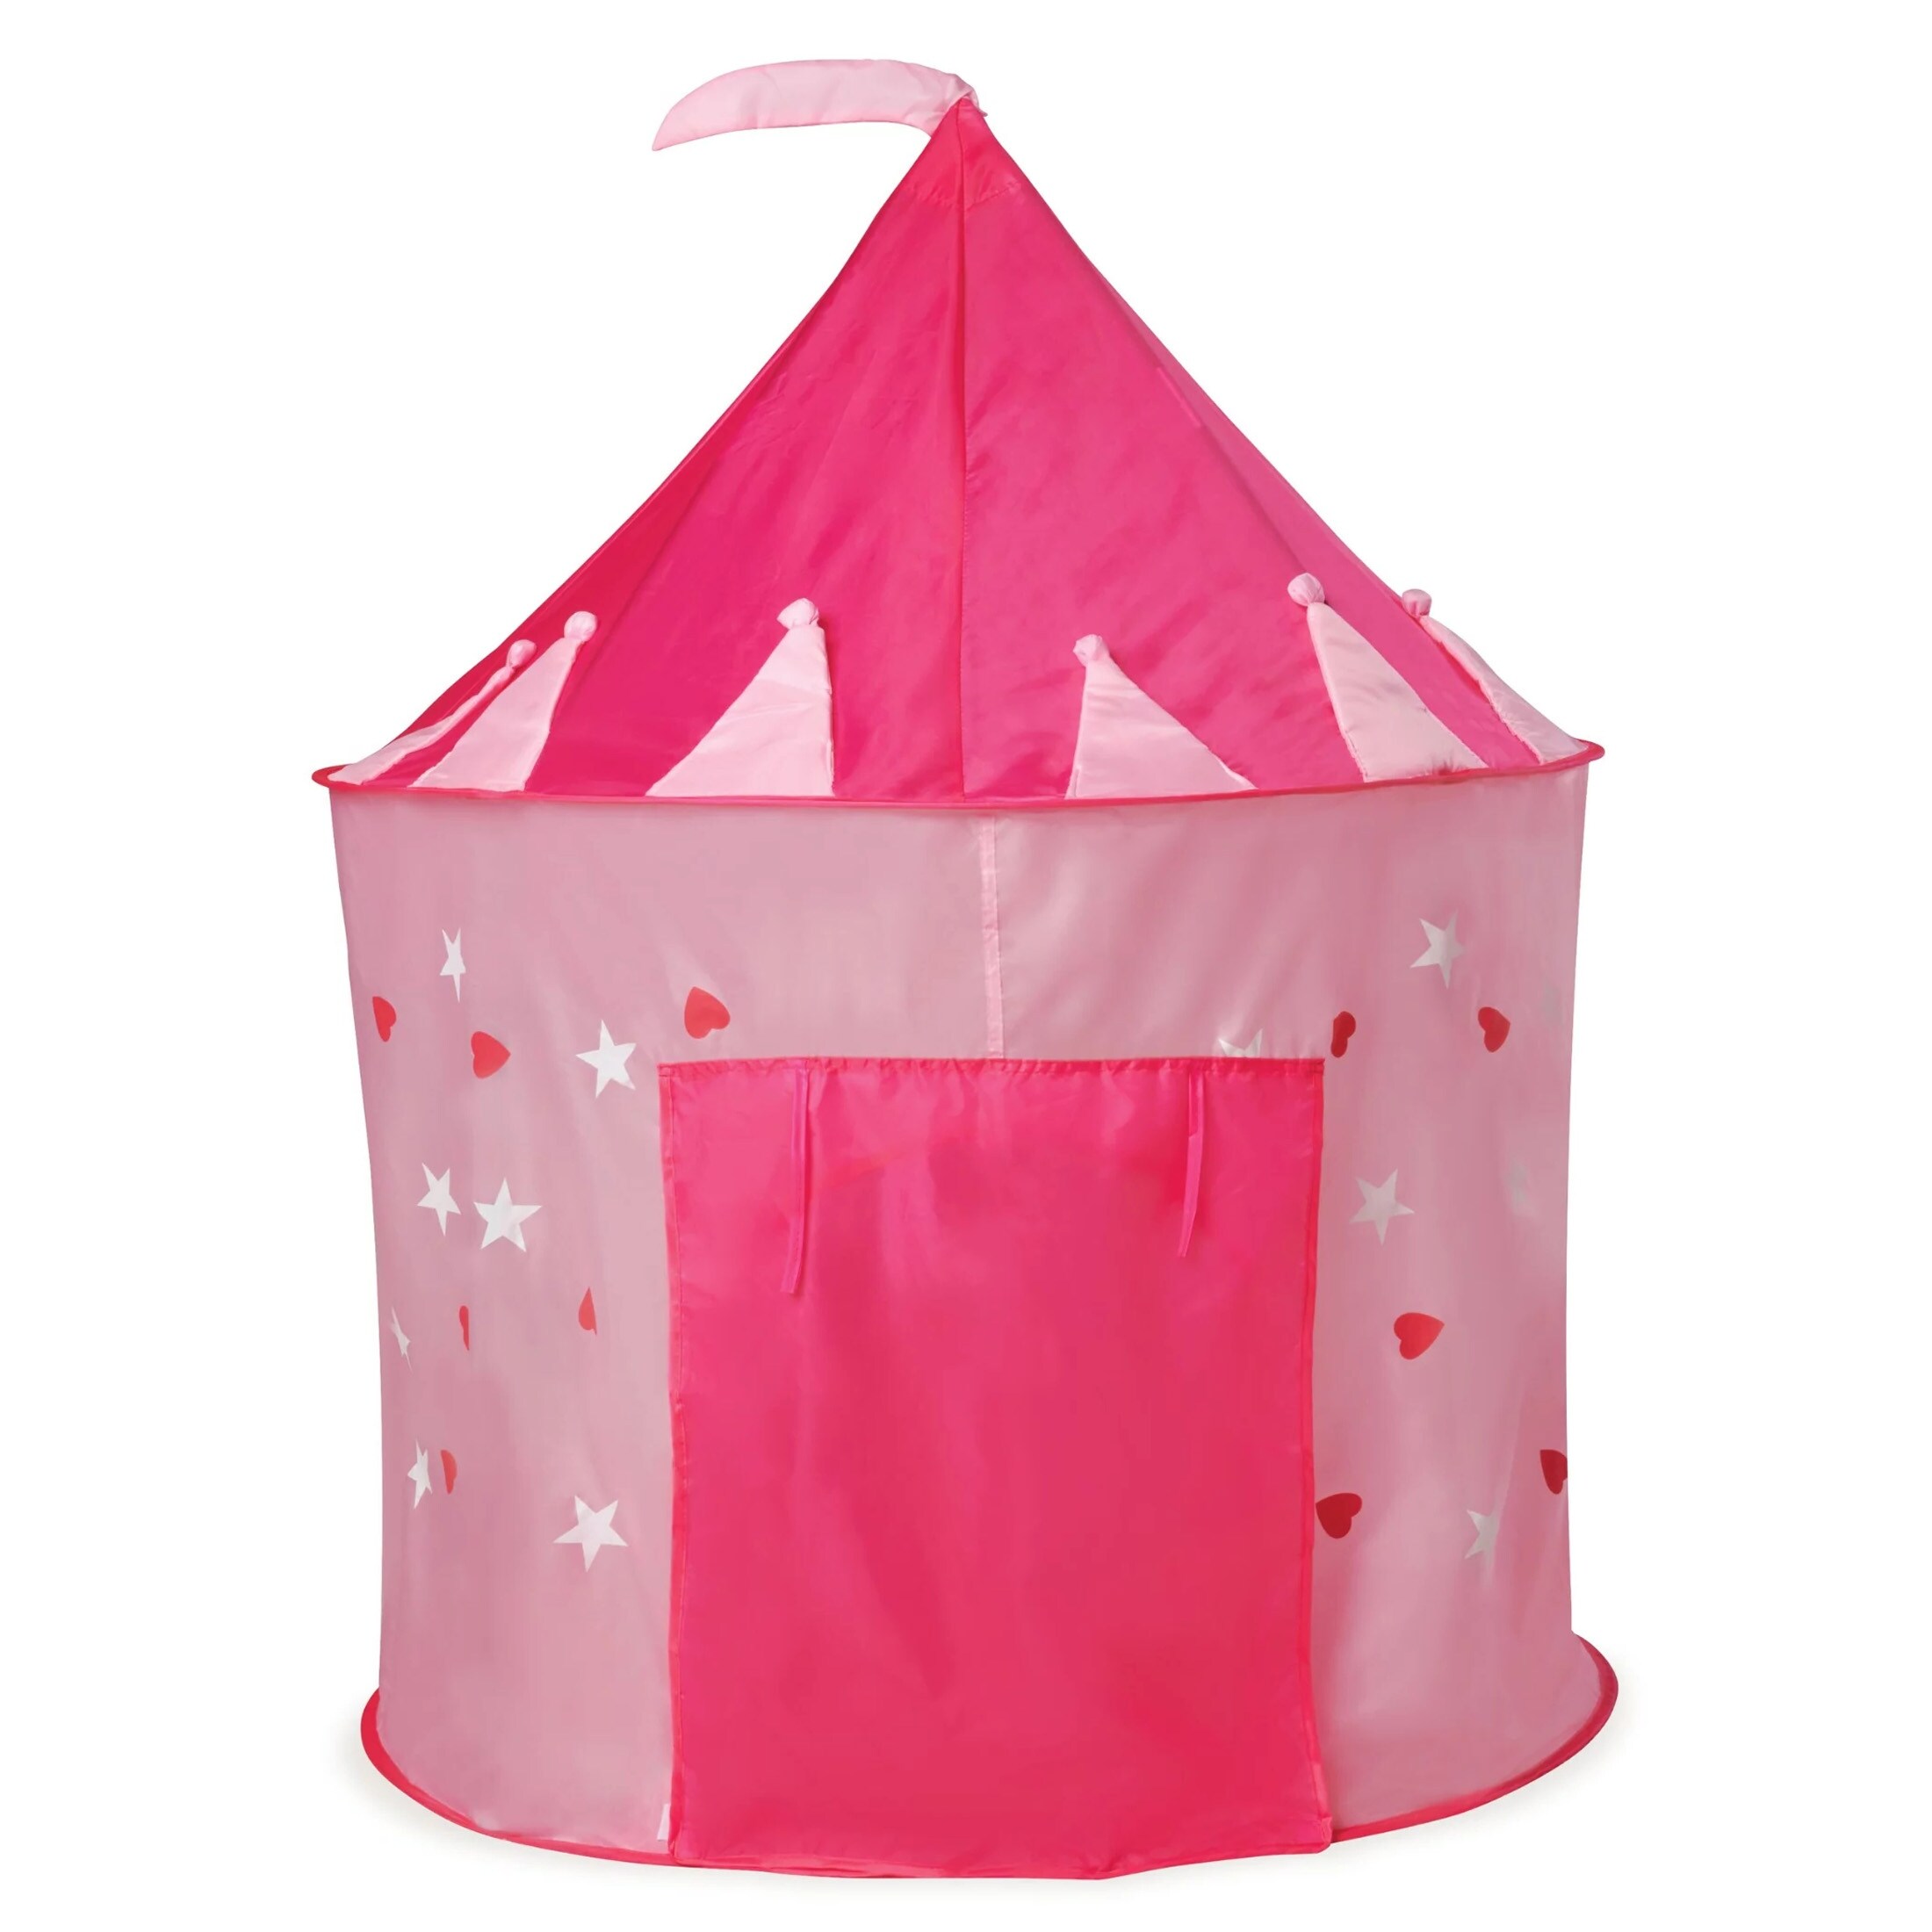 Princess Tent, Fabric Playhouse, for Young Children Ages 3+